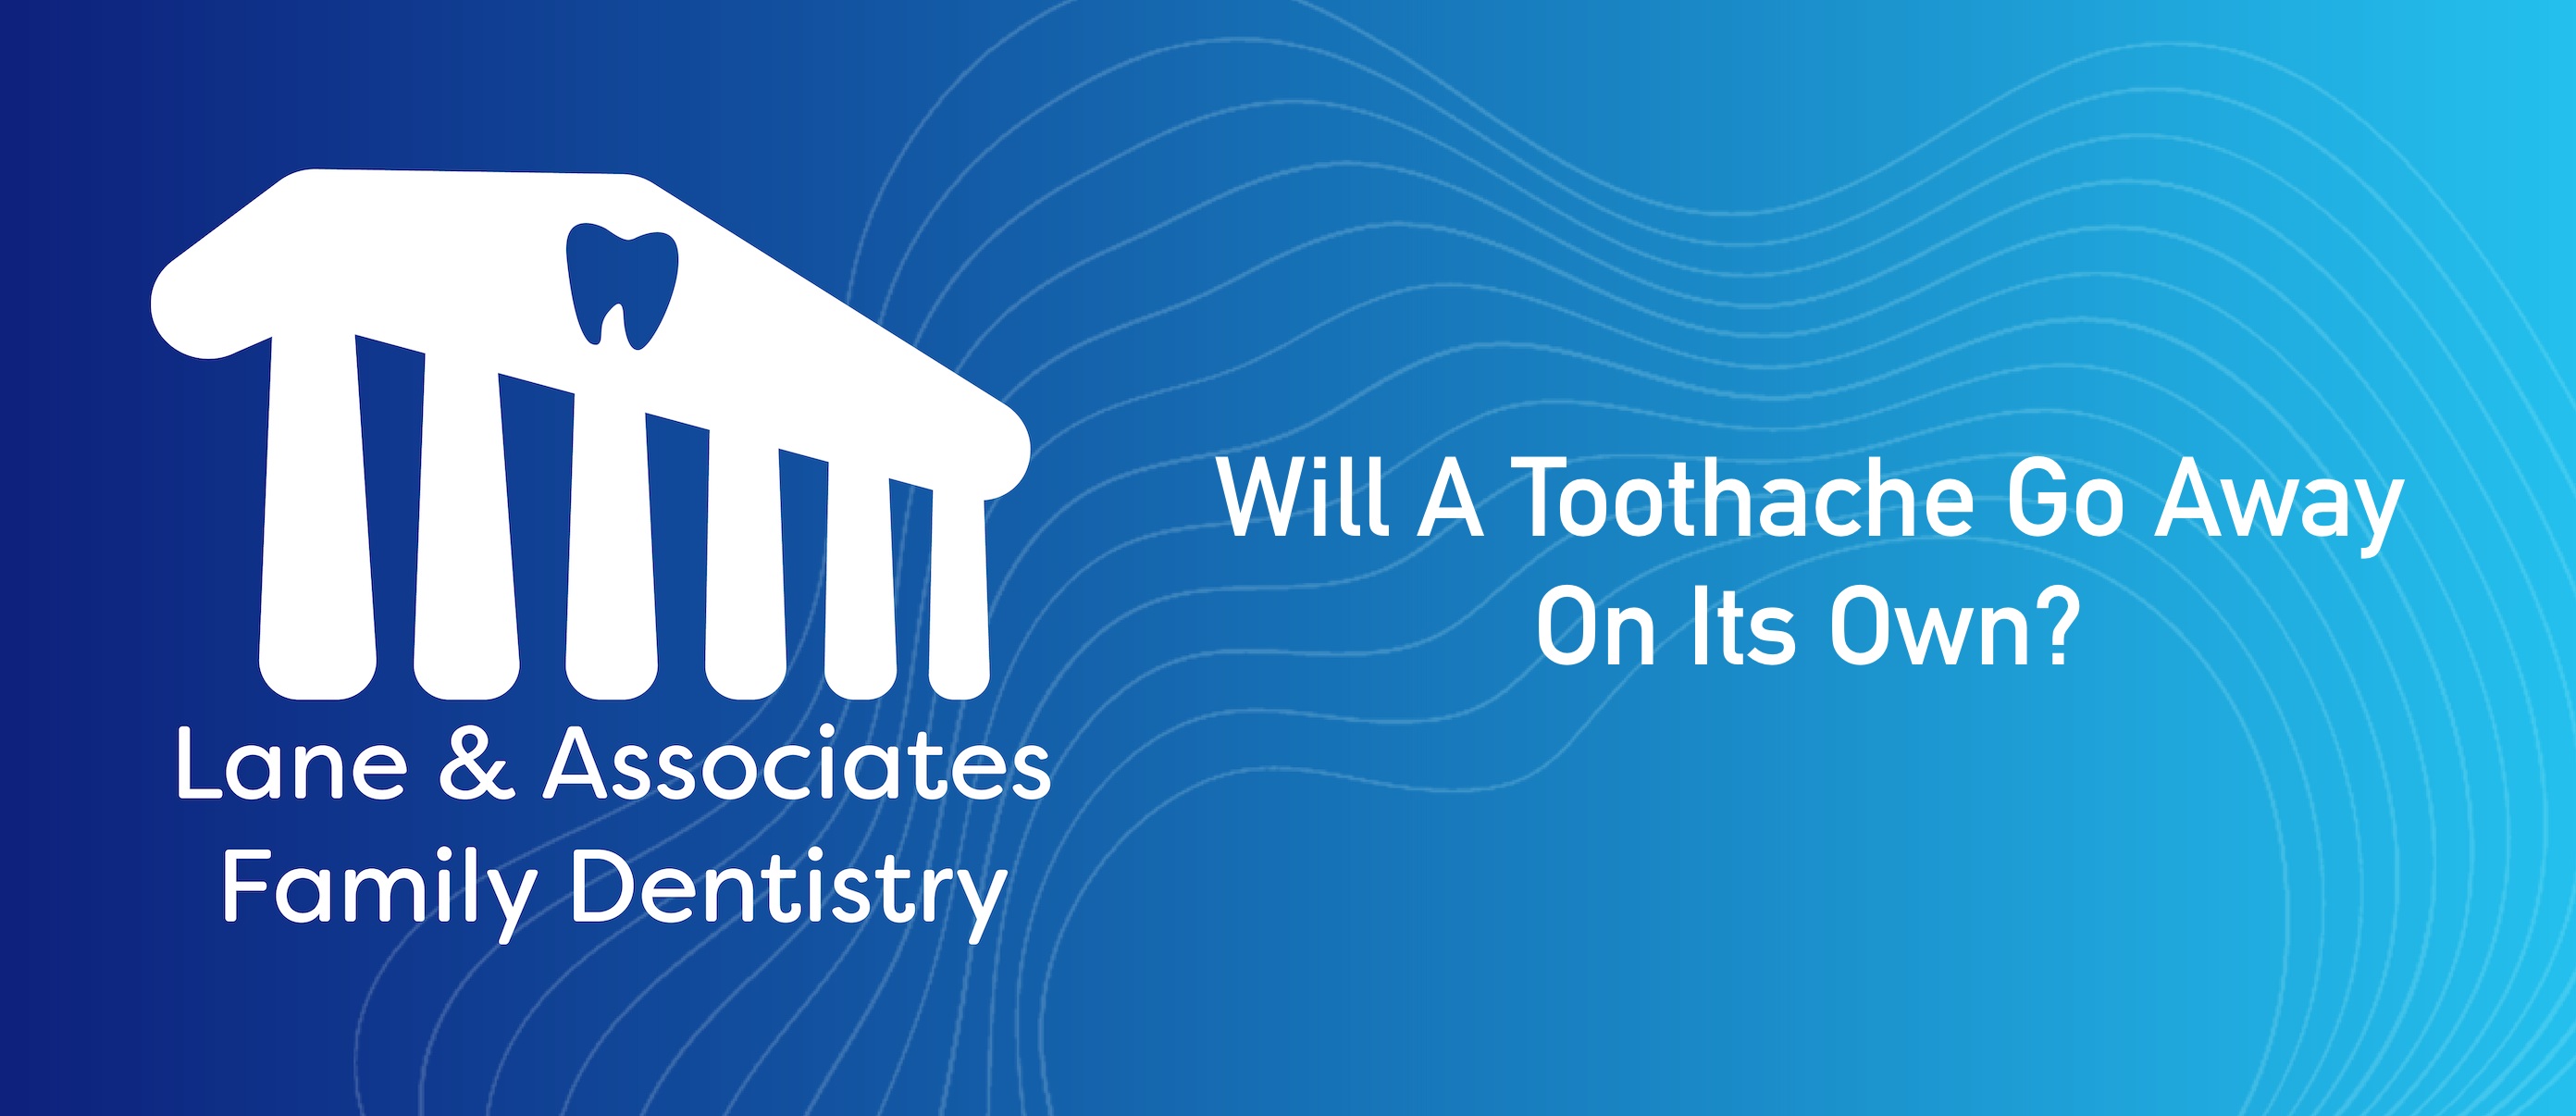 Will A Toothache Go Away On Its Own?